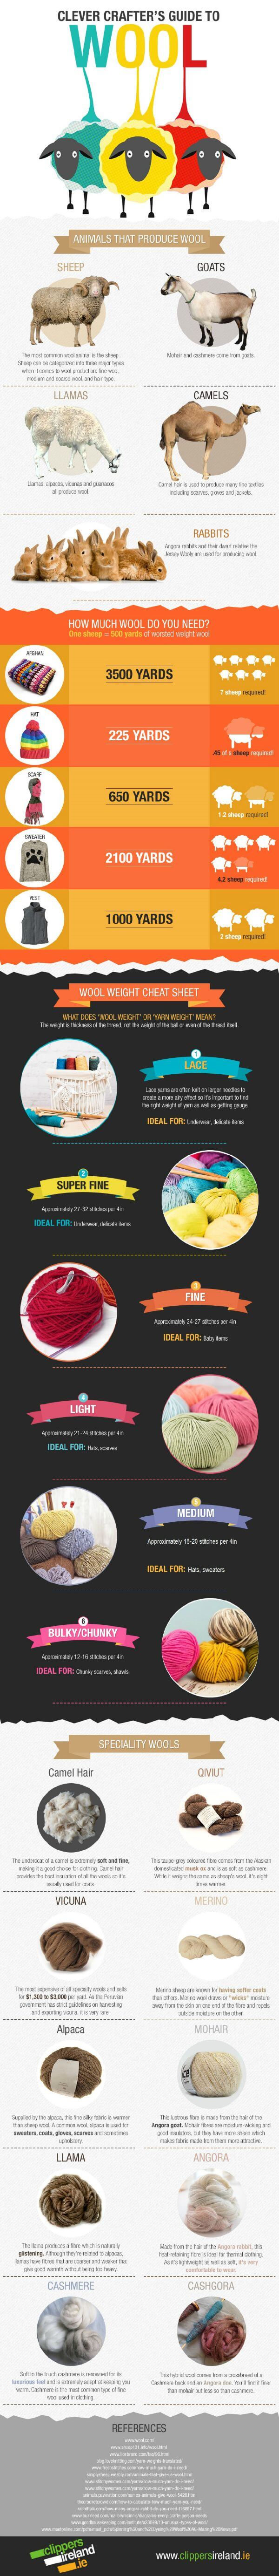 A Clever Crafter’s Guide to Wool | www.petalstopicots.com 